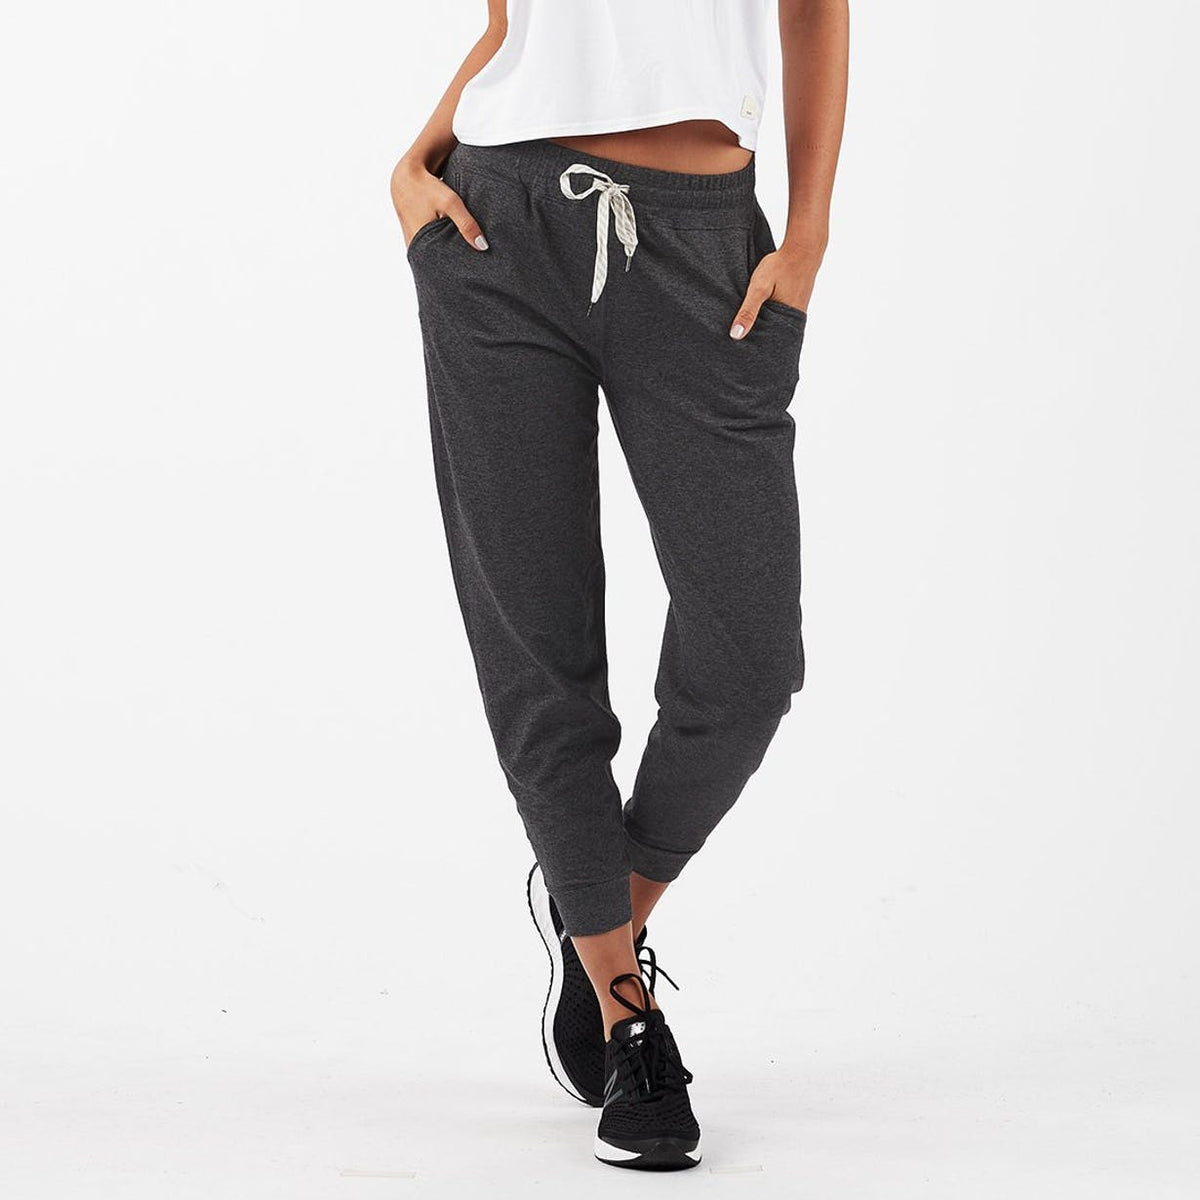 WOMEN'S PERFORMANCE JOGGER  Performance Running Outfitters